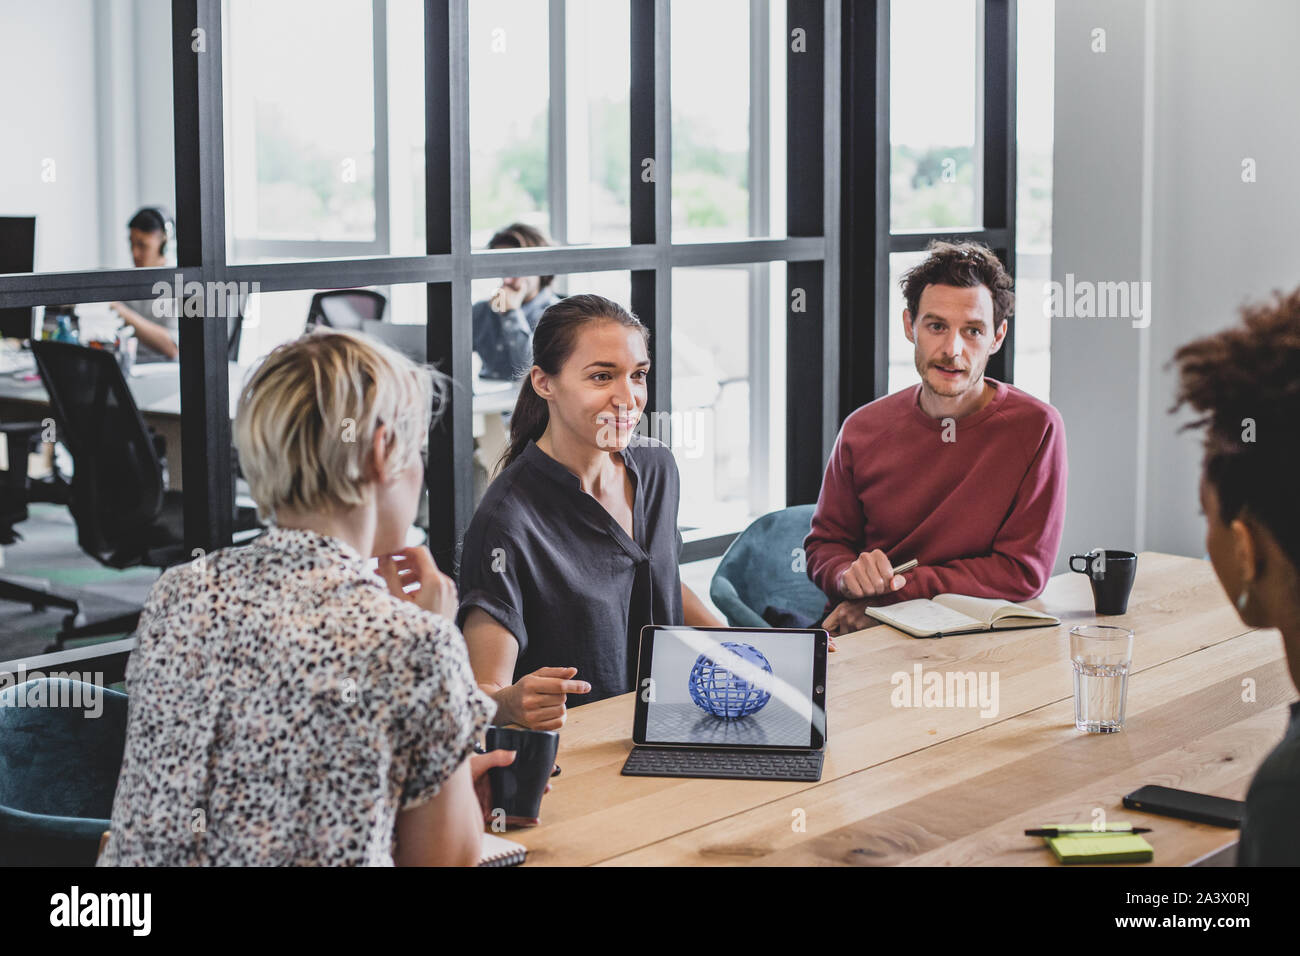 Hispanic businesswoman giving a presentation in a meeting Stock Photo